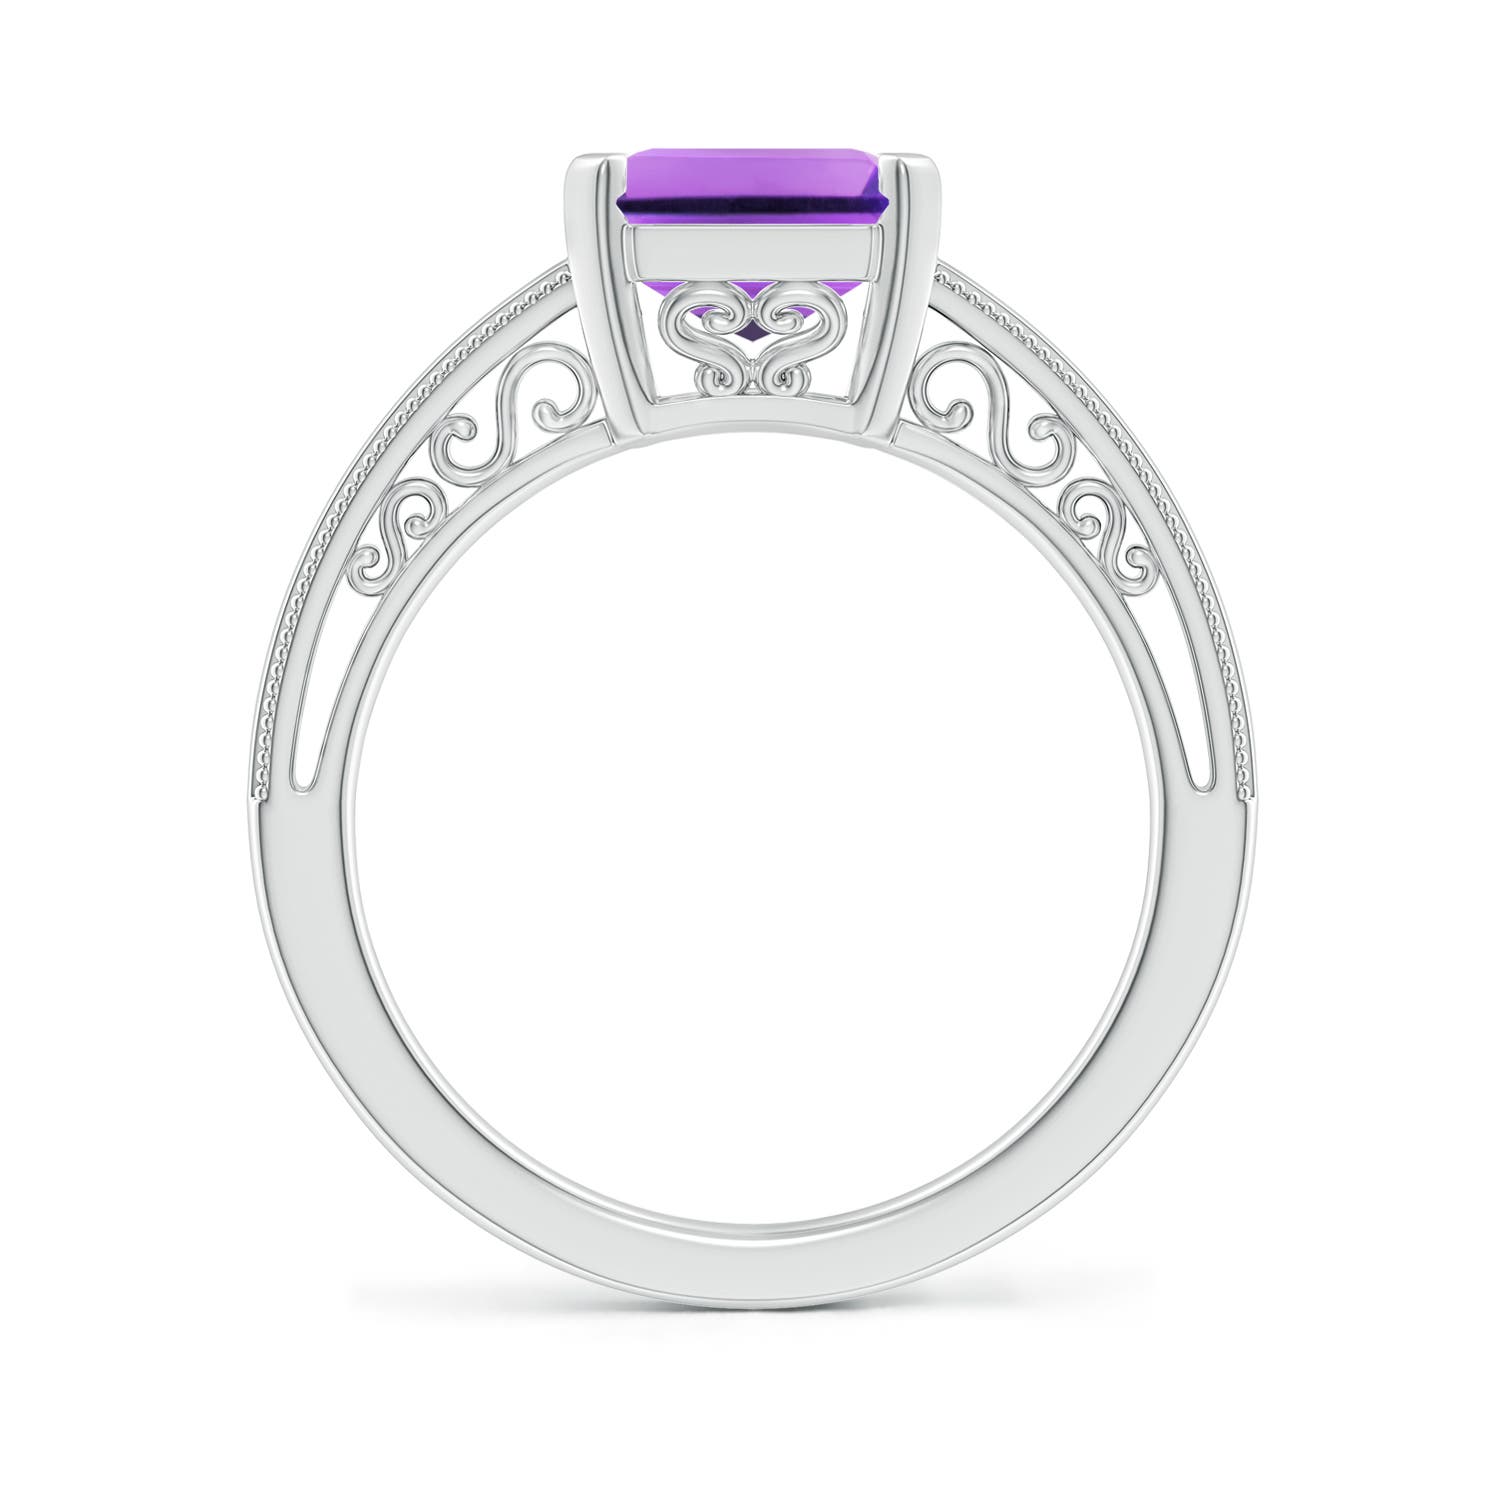 AA - Amethyst / 2.9 CT / 14 KT White Gold